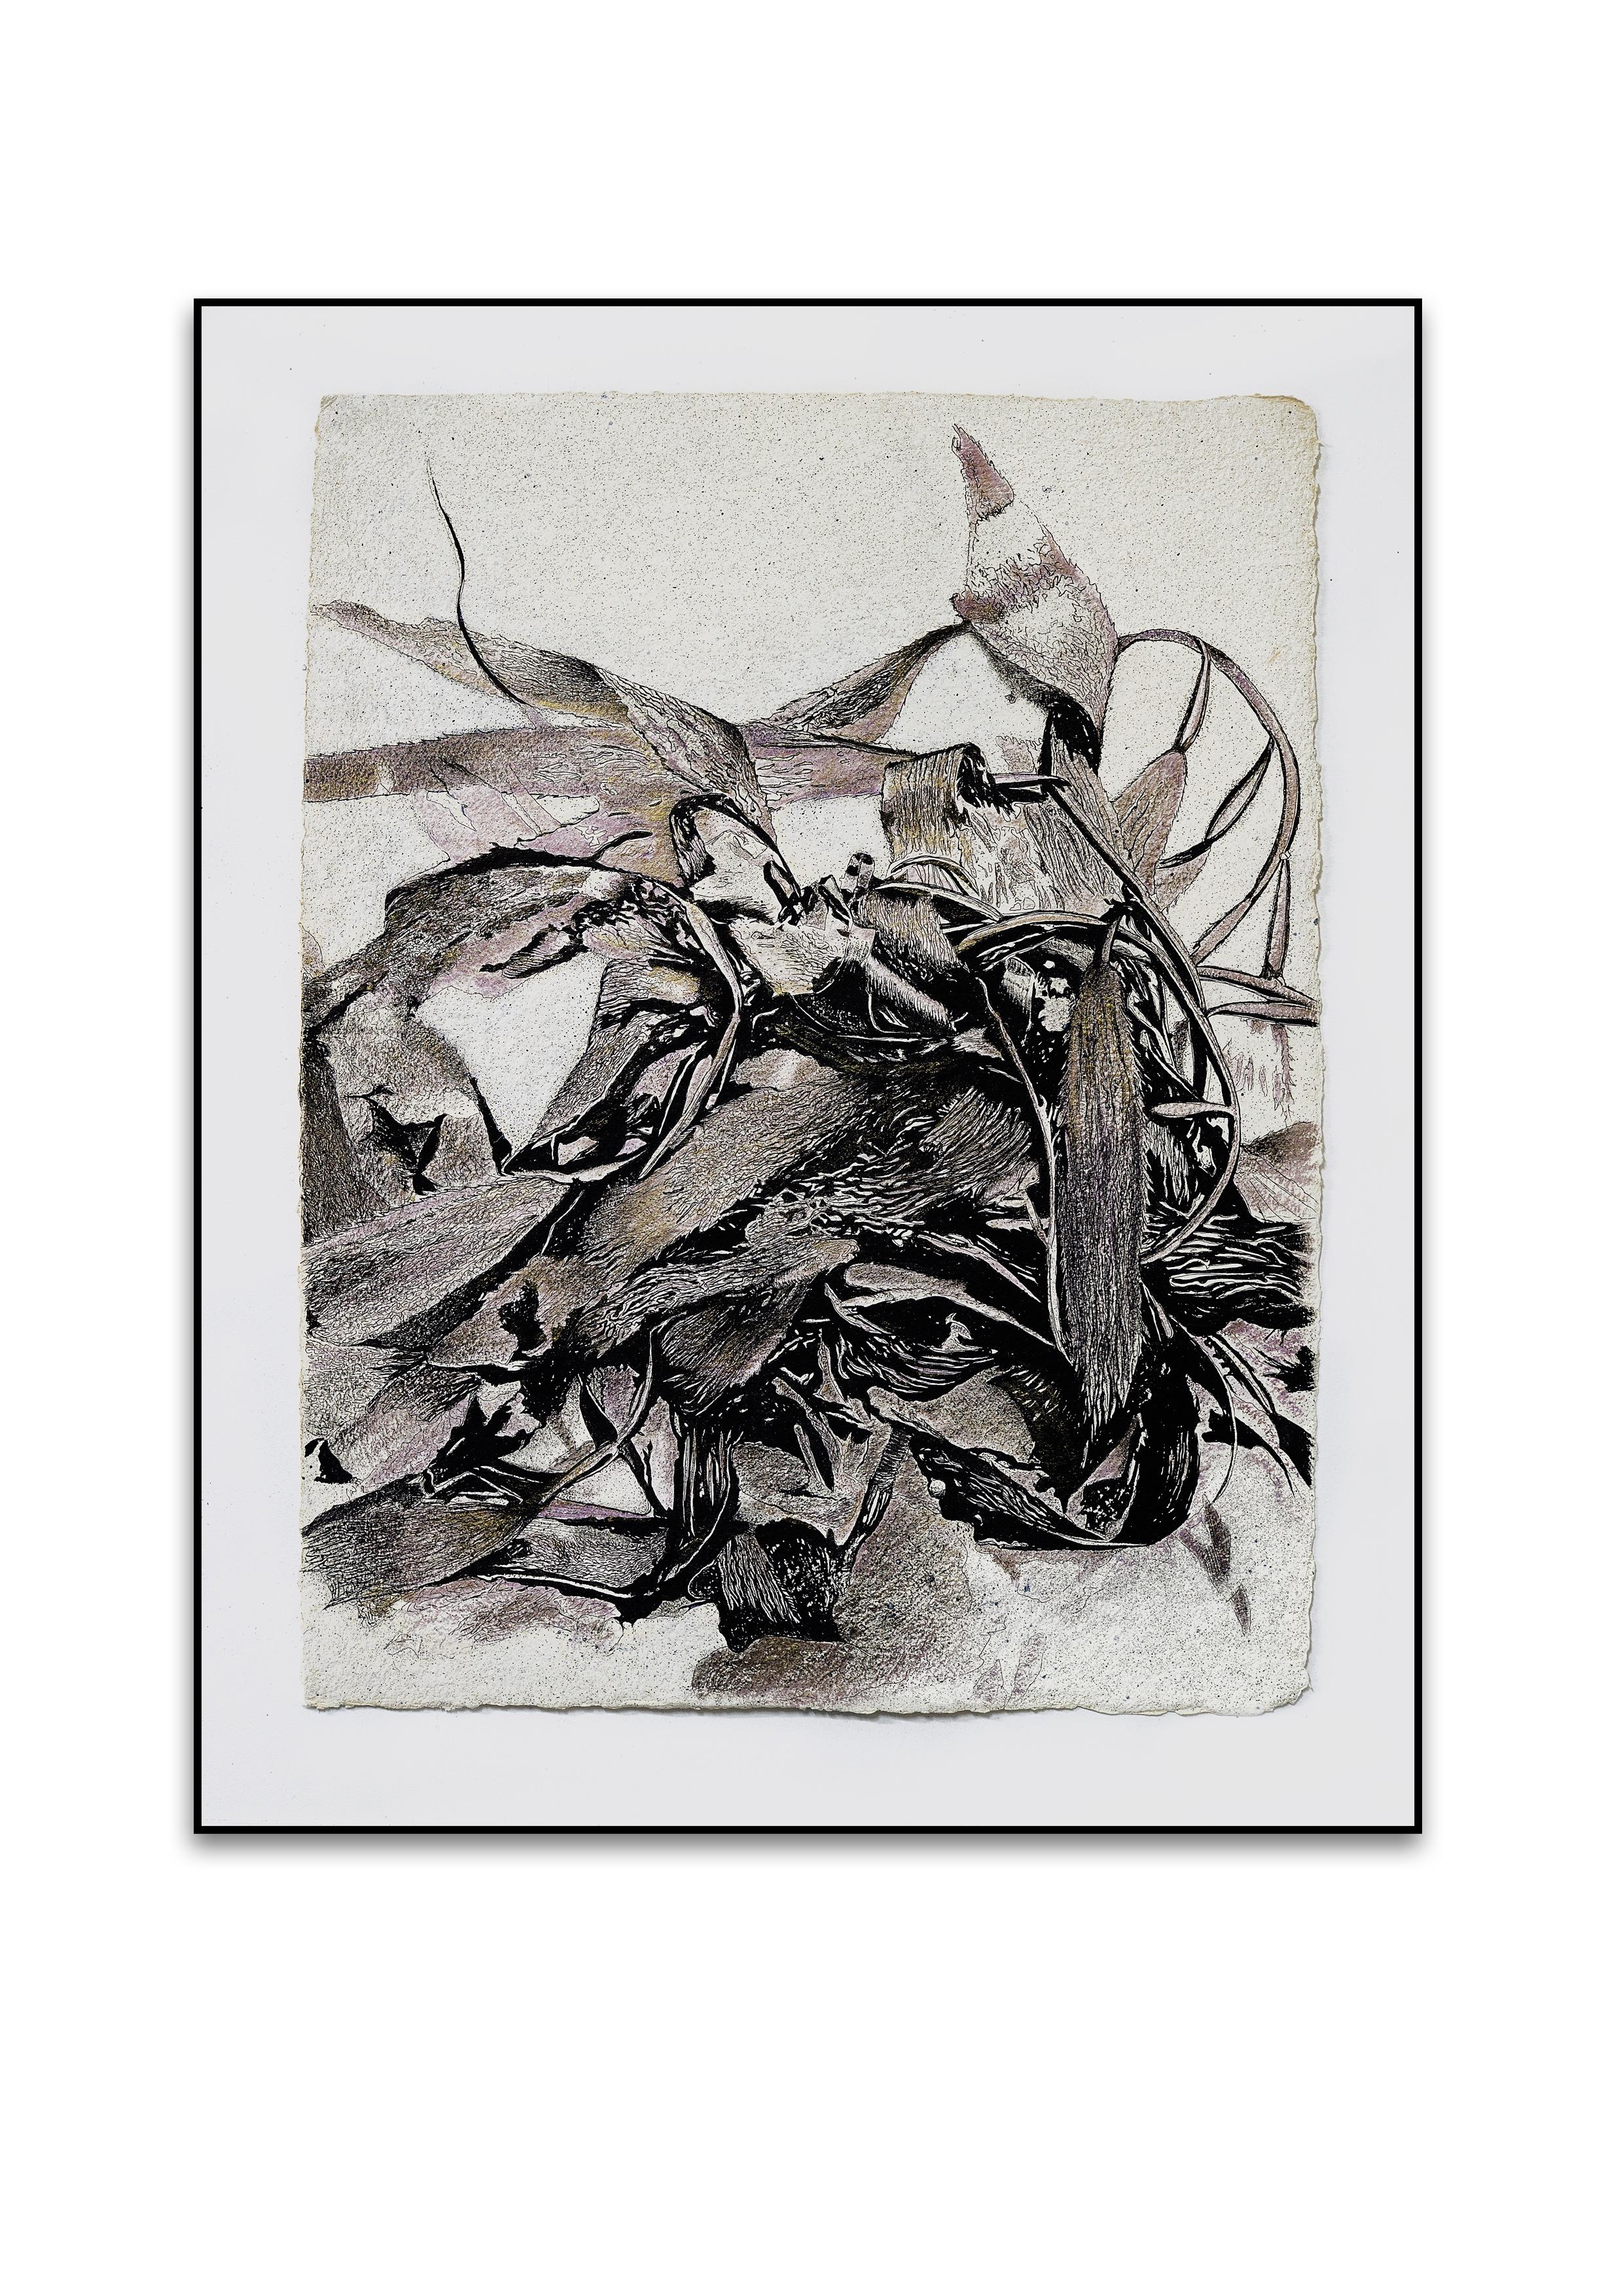 Mixed-media: Sumi Ink, graphite, metallic pigment and acrylic on Moulin de Larroque paper, made by hand in a mill in France. The mixed media work is inspired by seaweed / kelp at a European beach where its — once abundant with life — coast line is